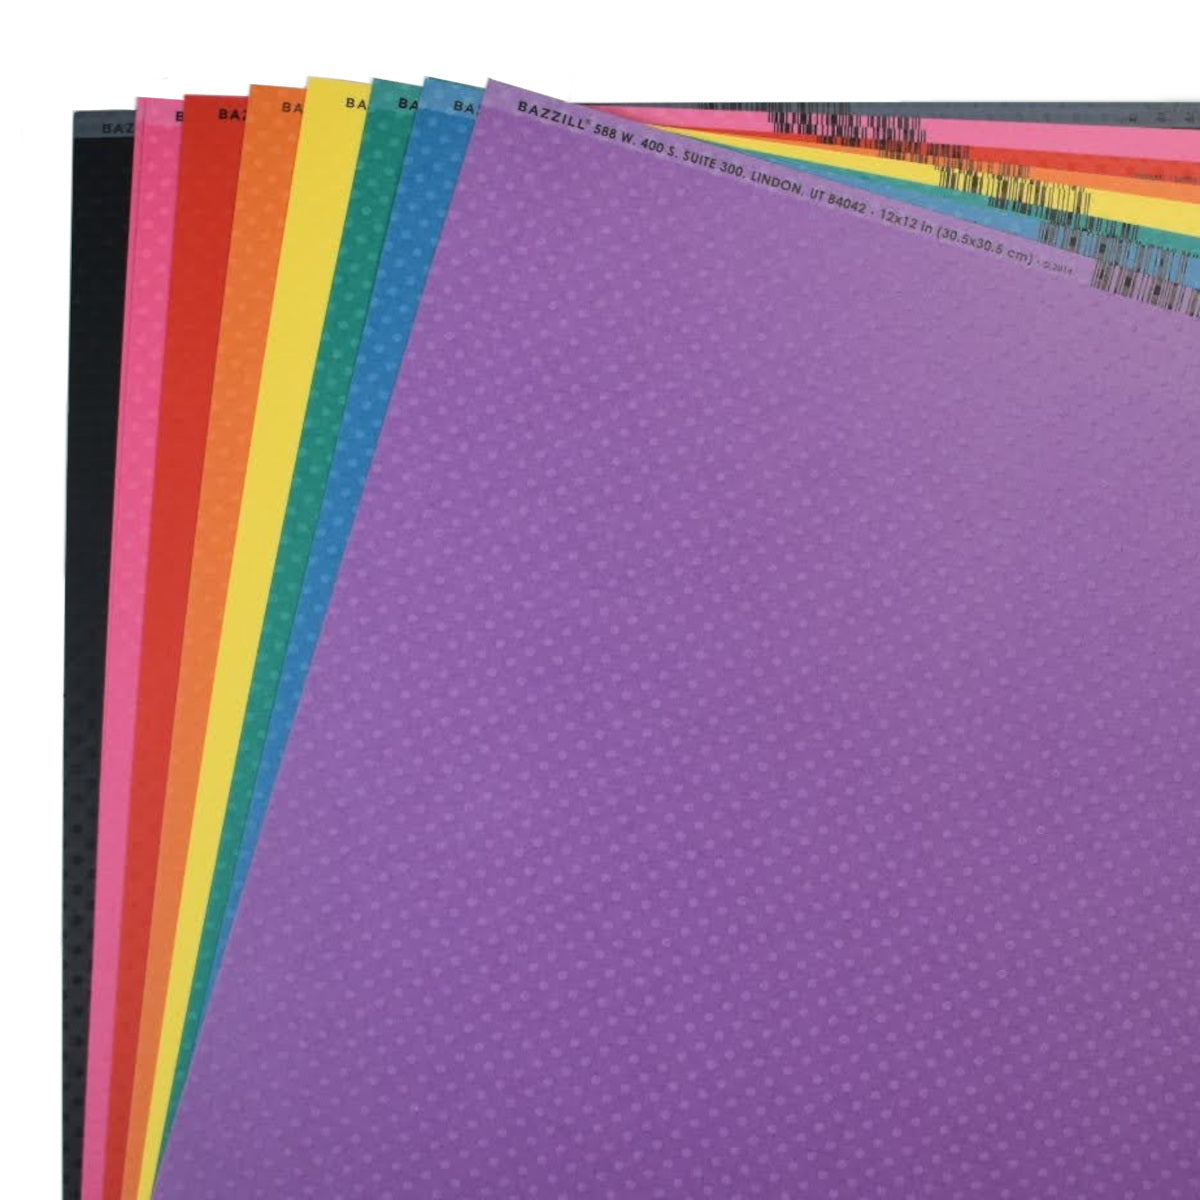 Bazzill Dotted Swiss Primaries Pack has eight bright colors of embossed dot, 12x12 cardstock